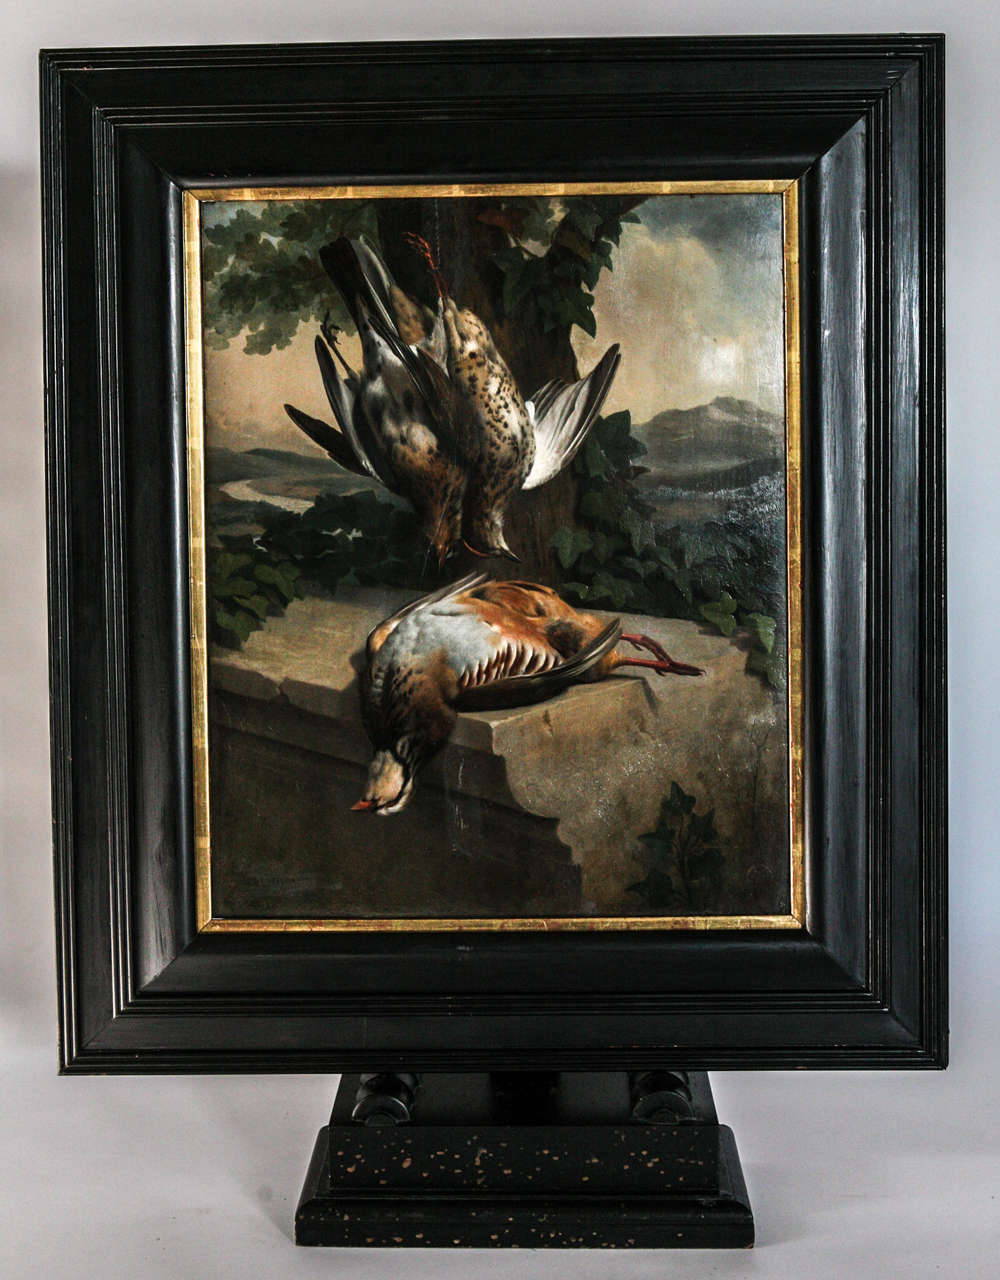 Oil on board.  Mid-19th century continental painting.  Signed J. Baptista.  Ebonized frame with gilt fillet.  Frame size: 31